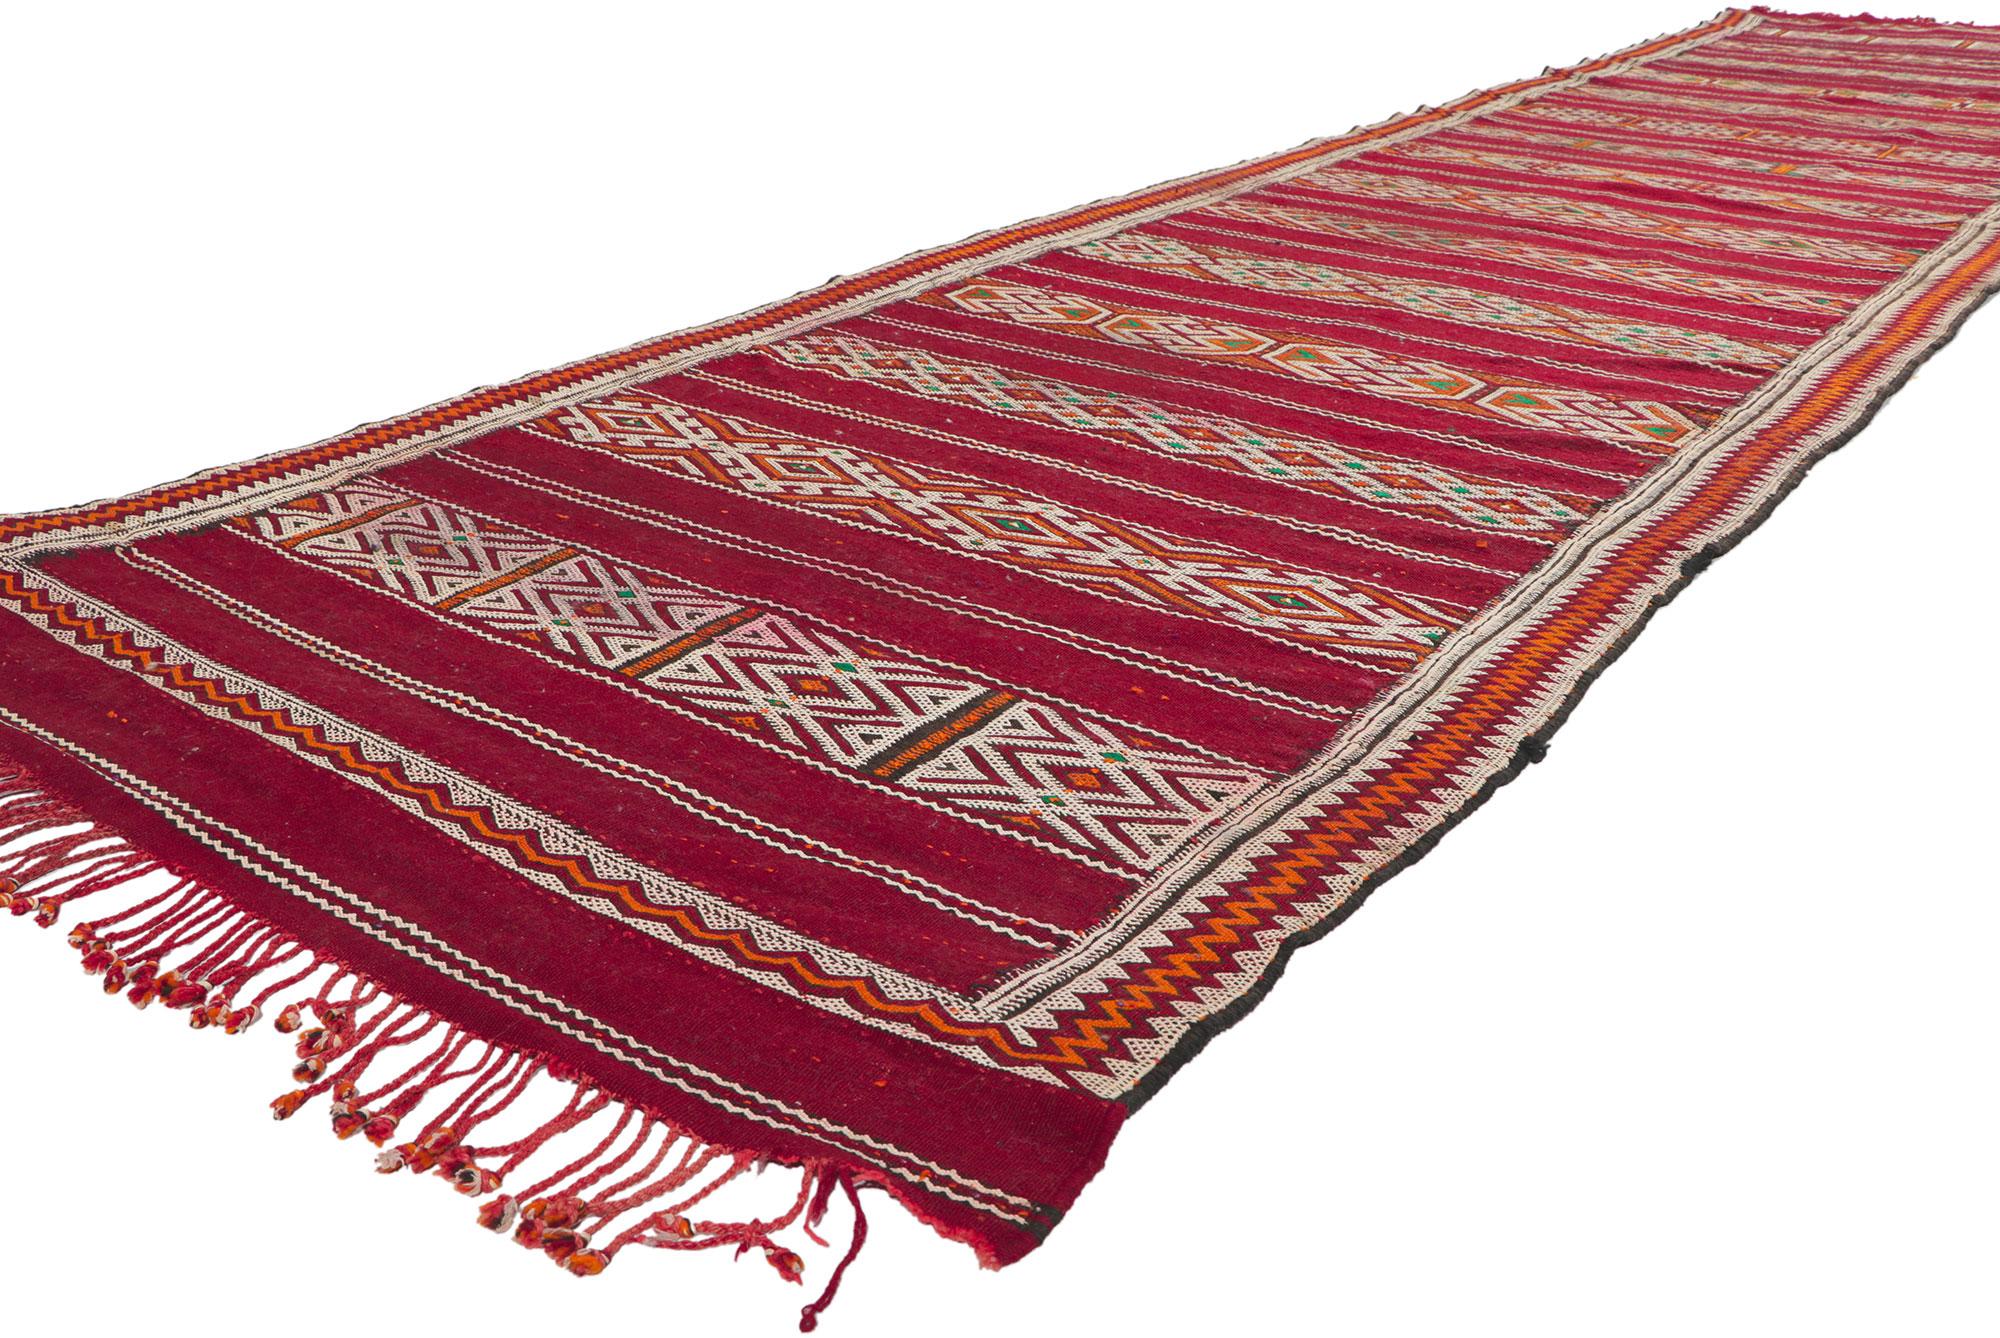 21707 Vintage Zemmour Moroccan Kilim runner, 03'08 x 16'04. Full of tiny details and tribal style, this hand-woven wool vintage Zemmour Berber Moroccan kilim rug runner is a captivating vision of woven beauty. The abrashed field is composed of